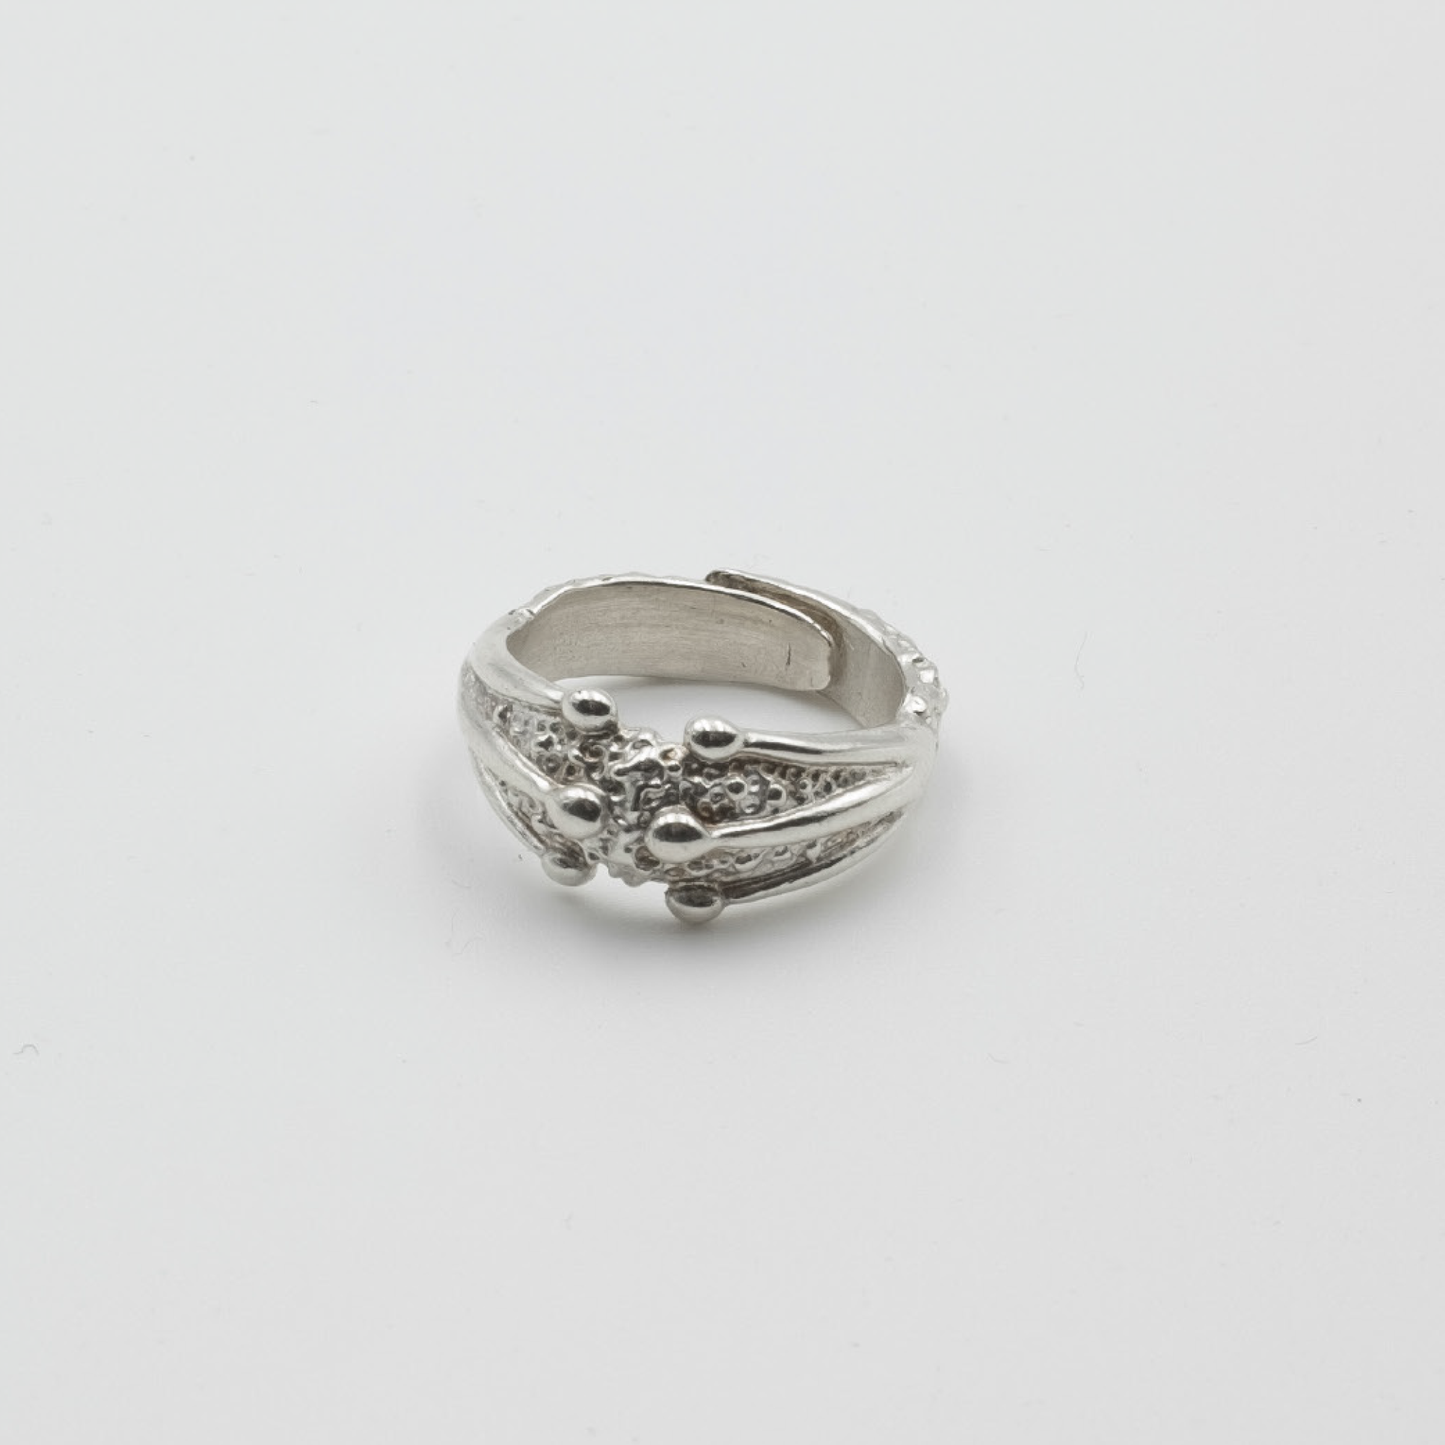 G2 - FROG ARM RING